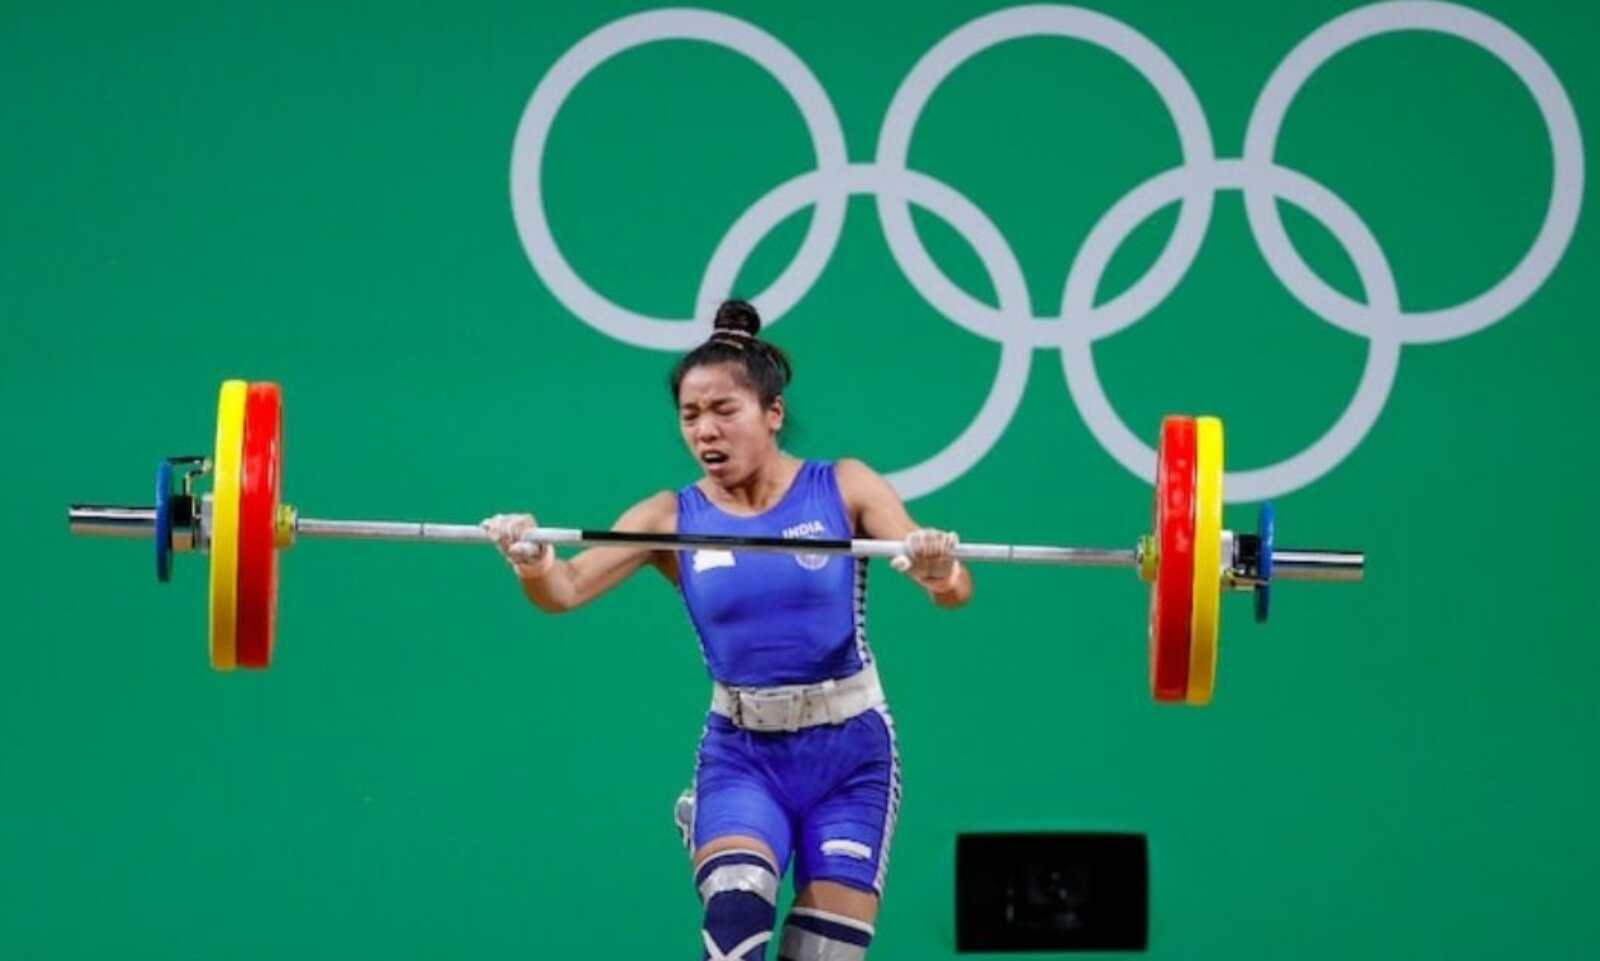 I have learned almost everything from Rio Olympics: Mirabai Chanu